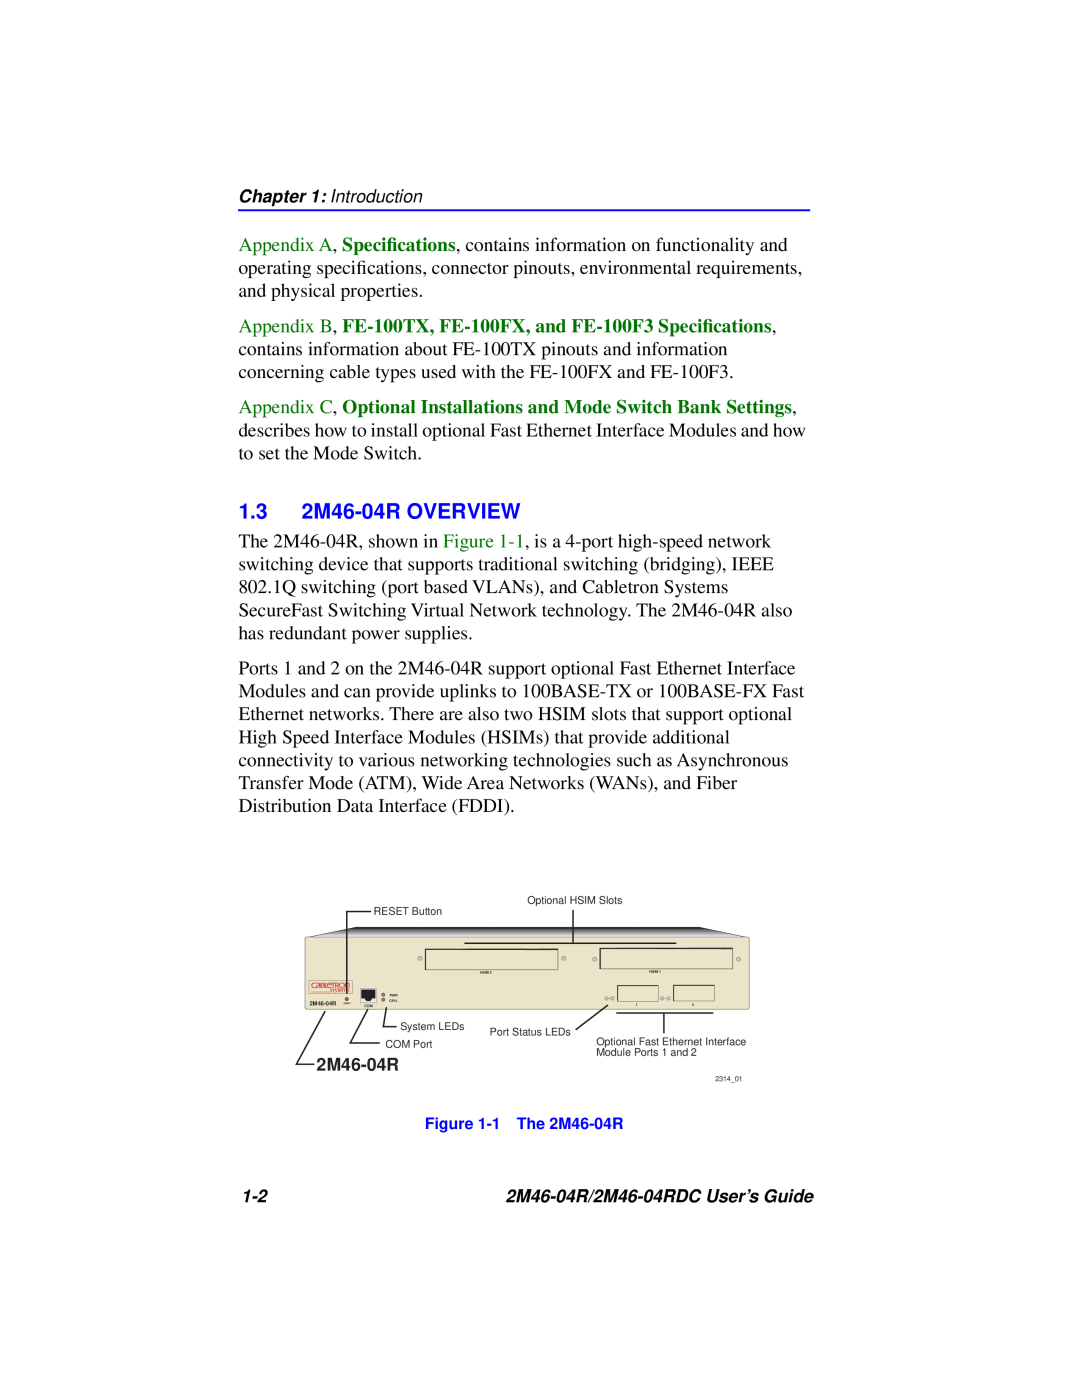 Cabletron Systems pmn manual 1.3 2M46-04R OVERVIEW 